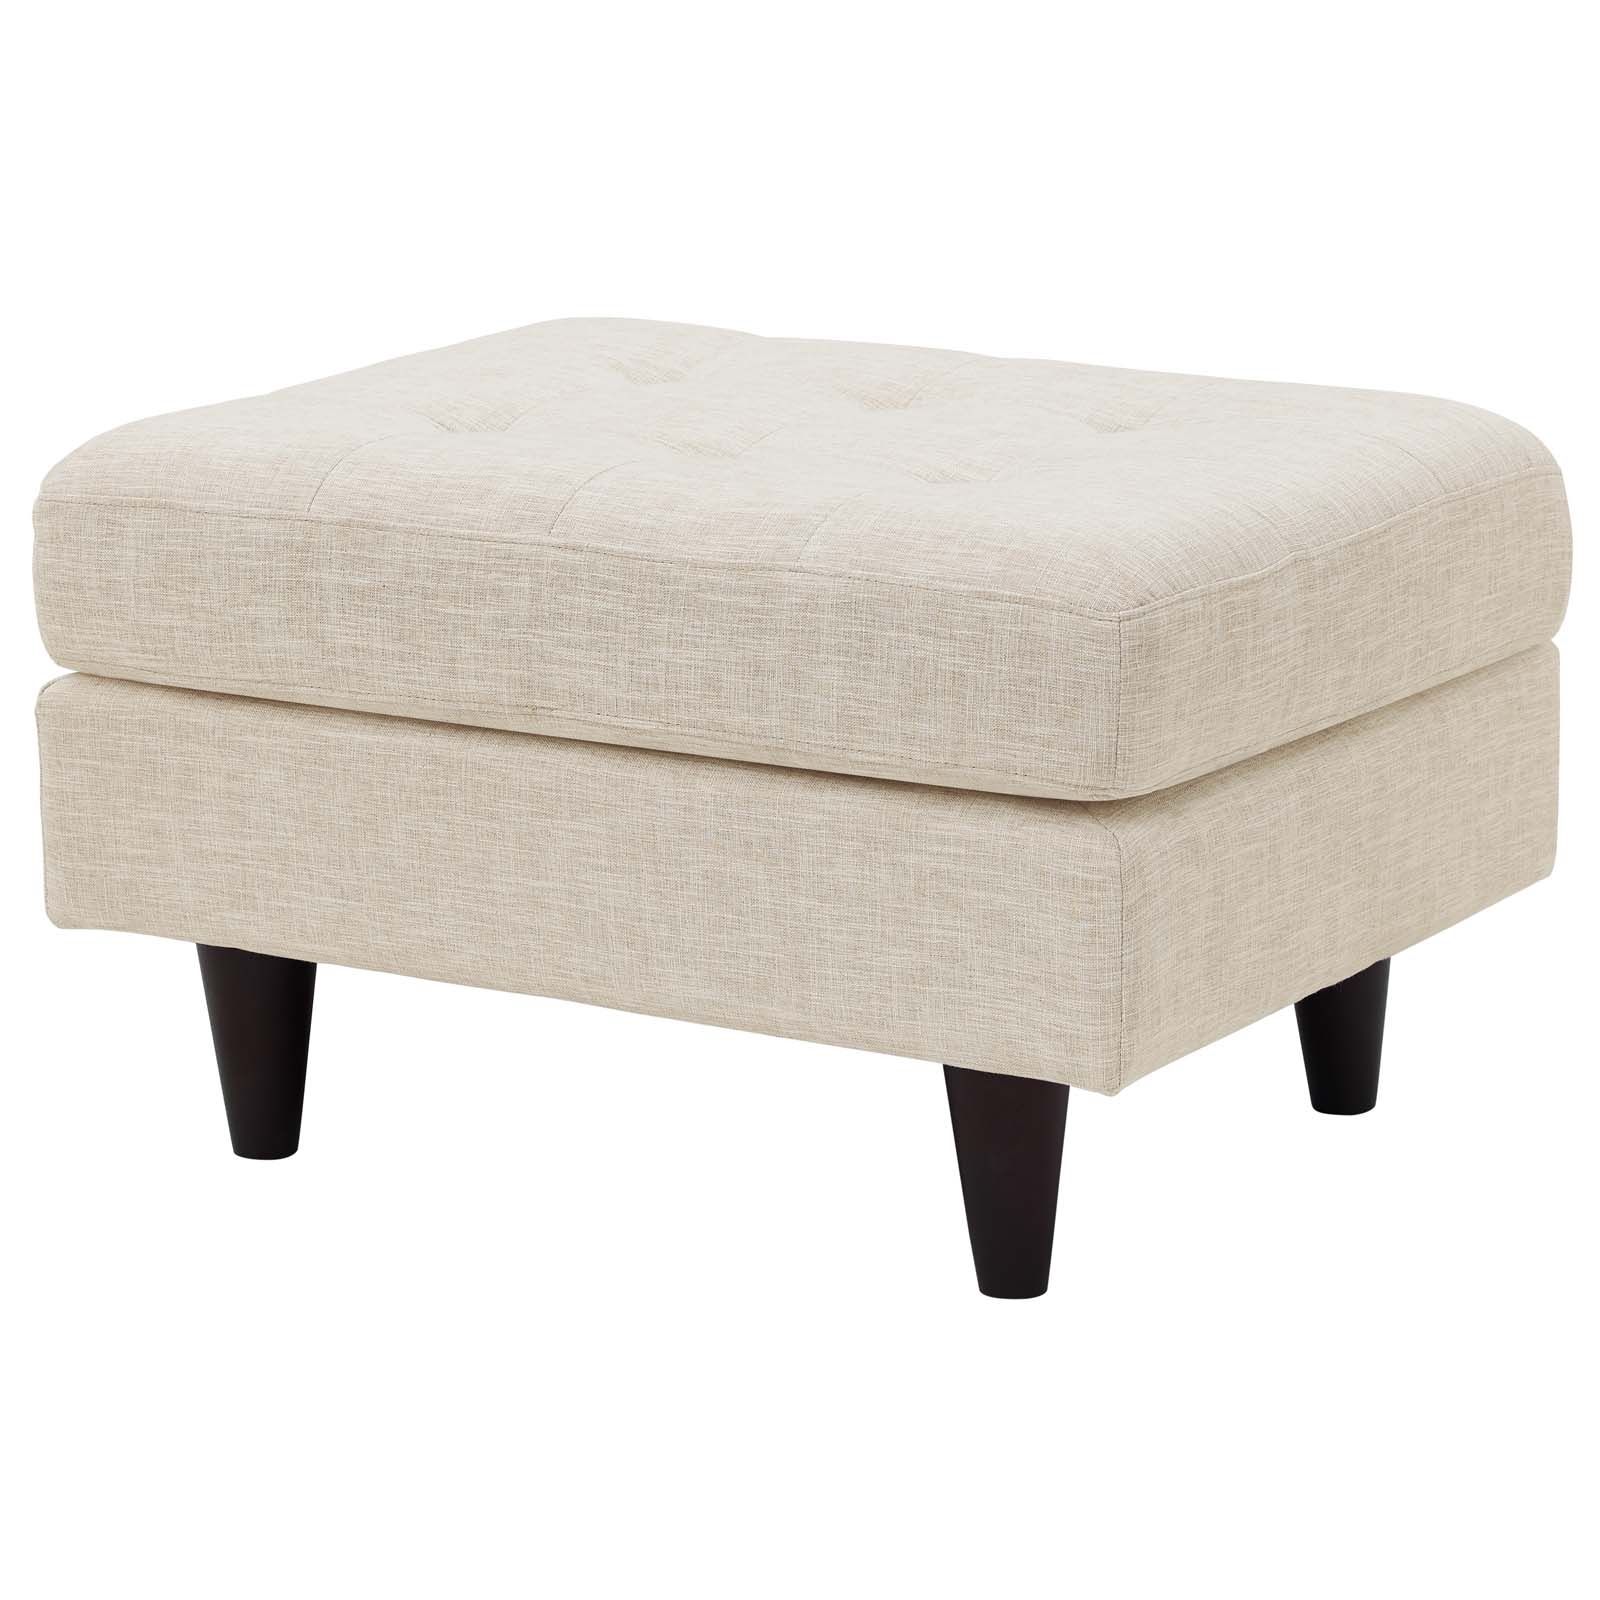 Multi Color Fabric Square Ottomans Regarding Famous Modway Empress Upholstered Fabric Ottoman, Multiple Colors – Walmart (View 10 of 10)